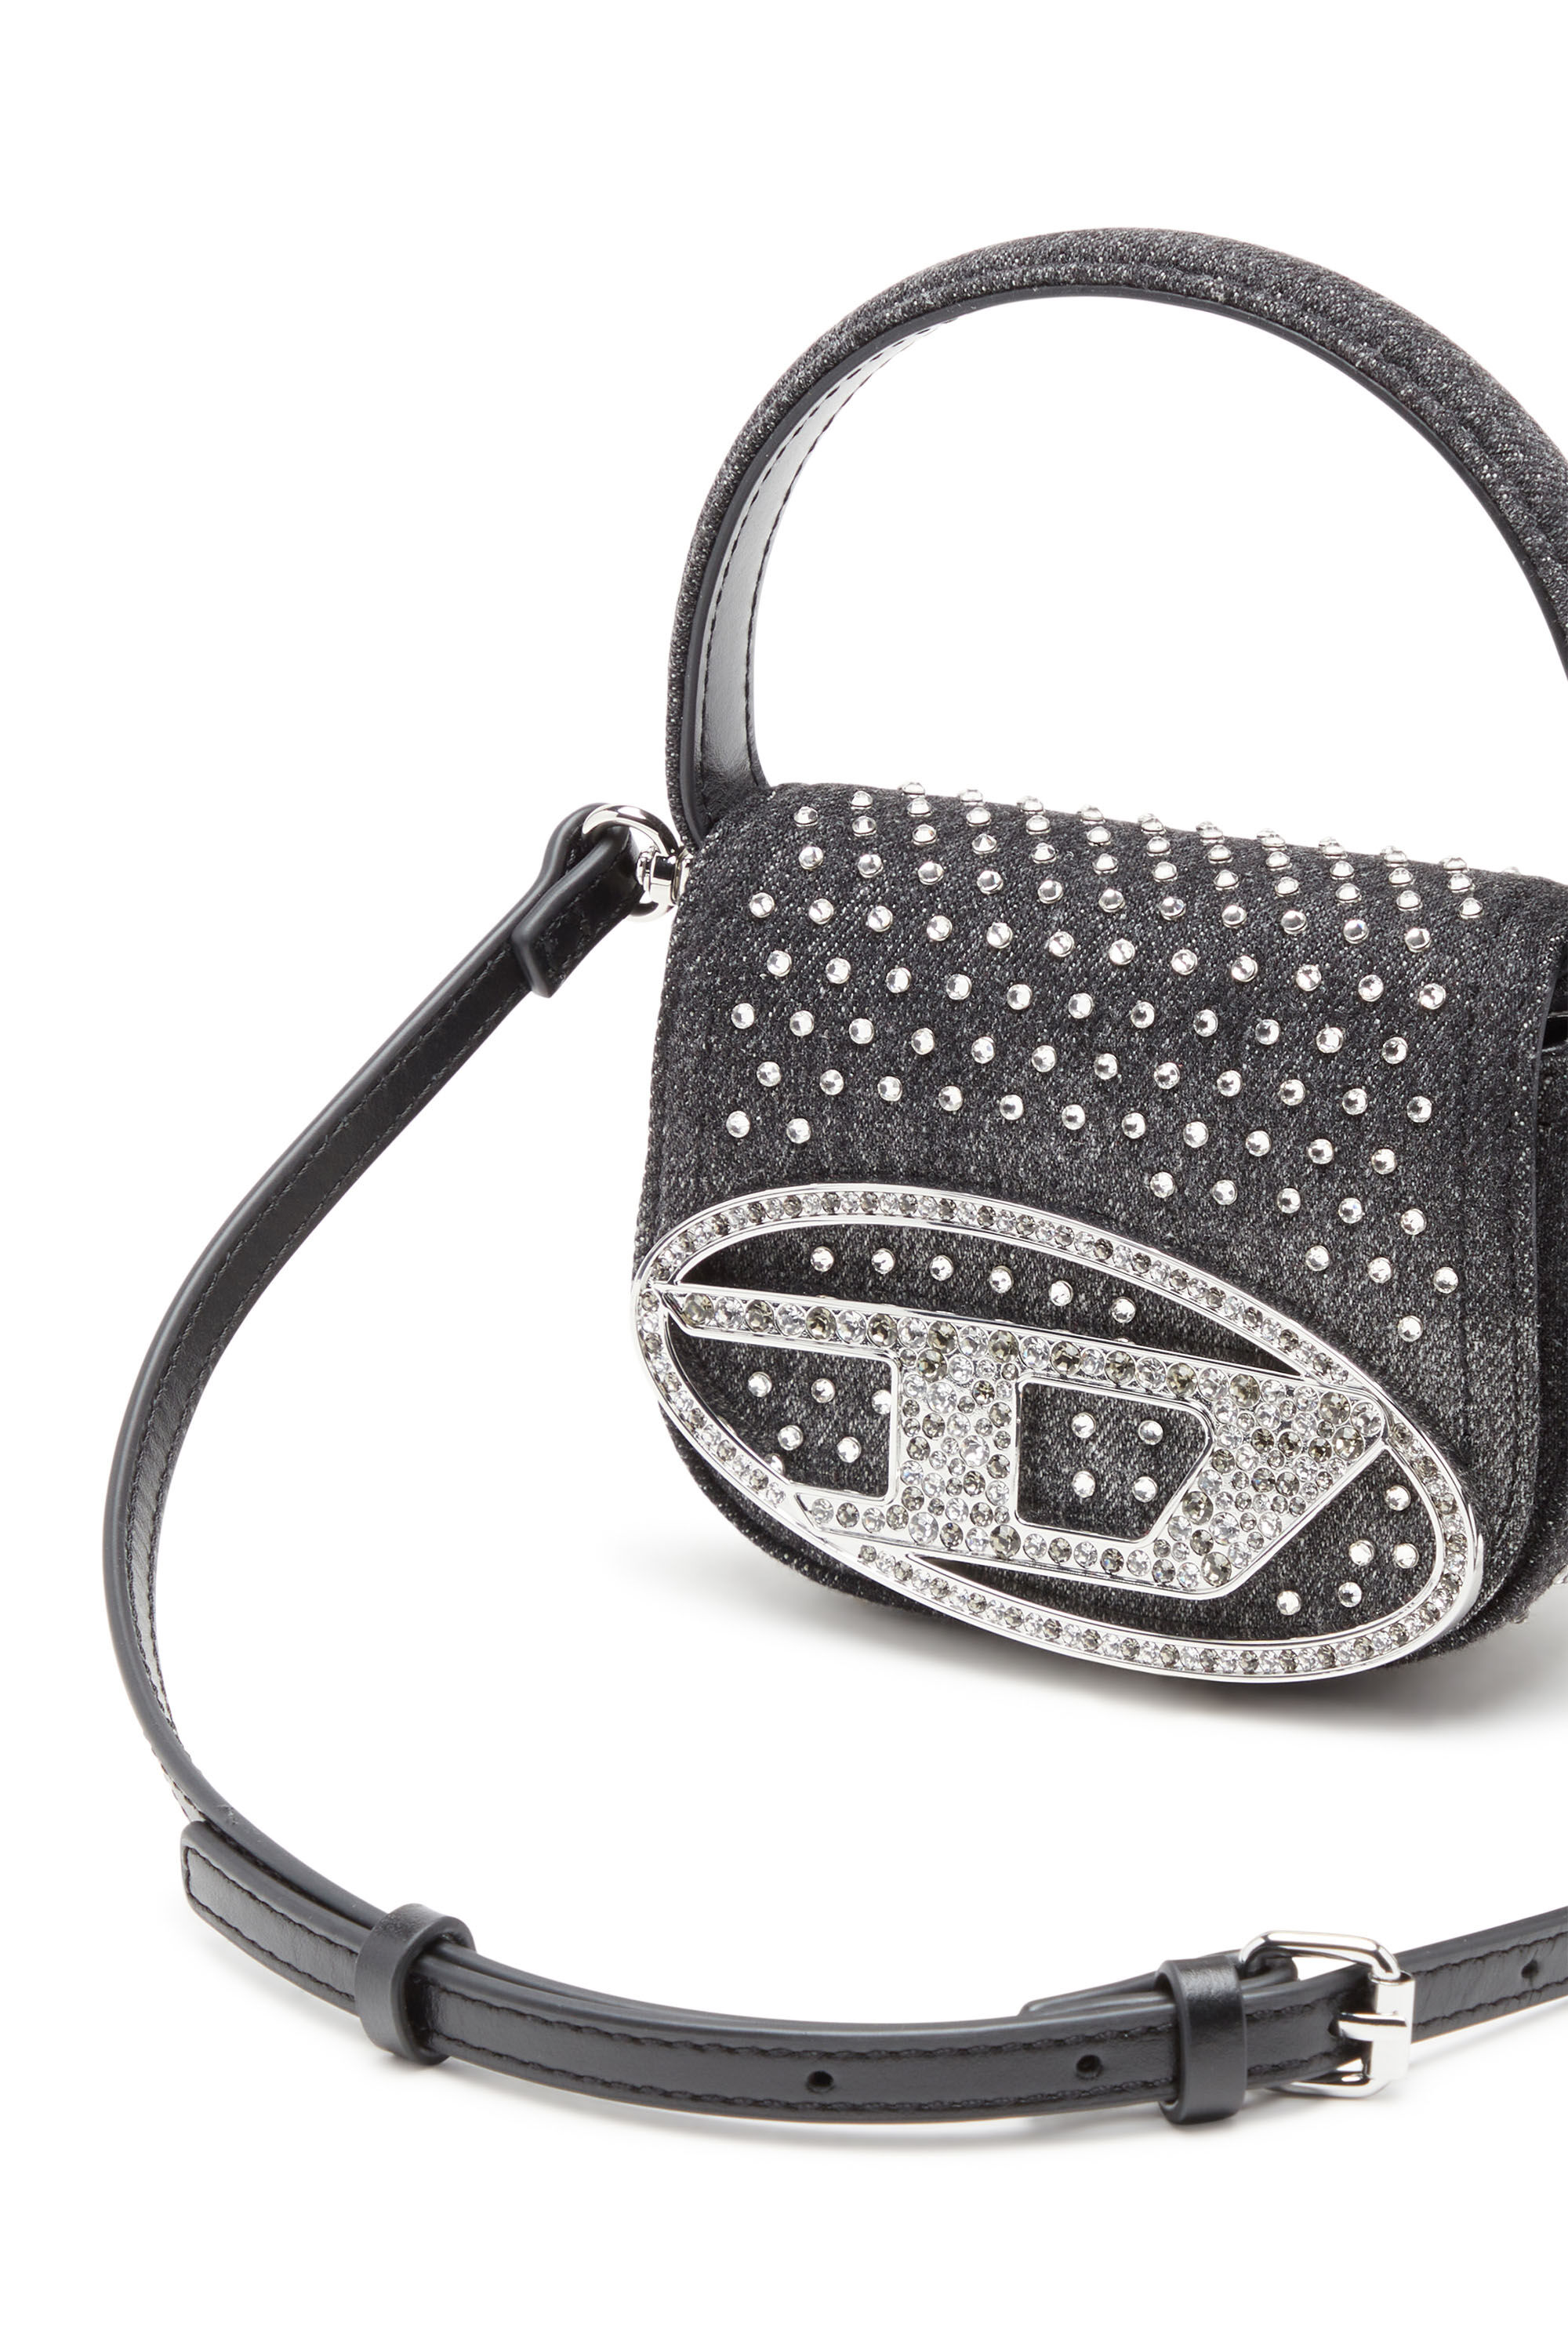 Women's 1DR Xs-Iconic mini bag in denim and crystals | Black | Diesel